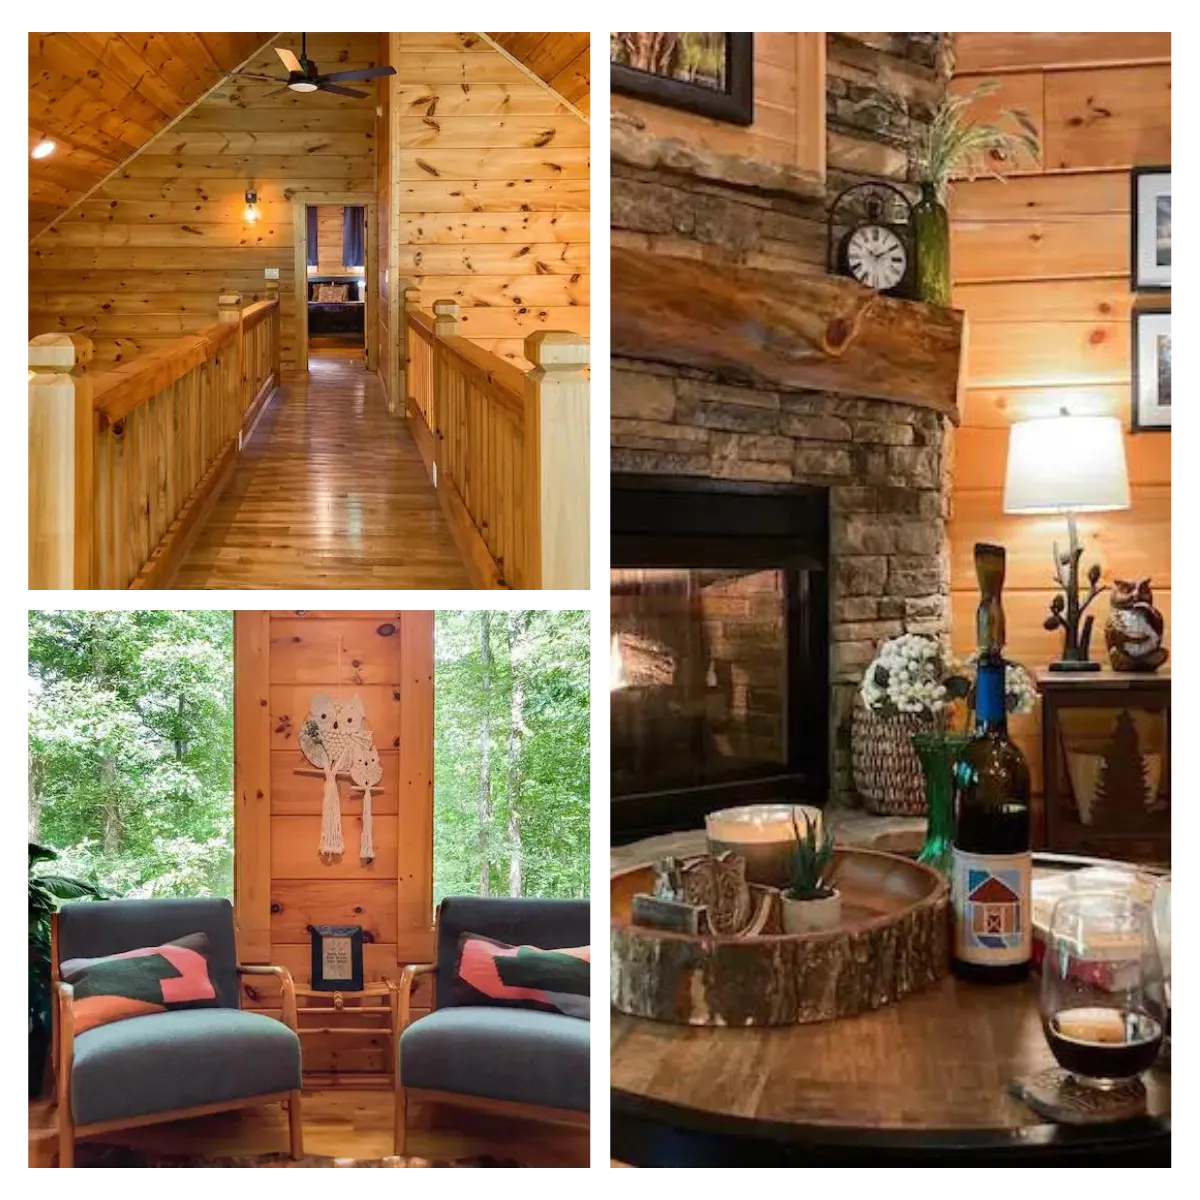 Escape to Blissful Getaway: A cozy cabin for families or friends, with a traditional living room, fun game lounge, mountain-view bar seating, a reading nook, and a big TV for movie nights.